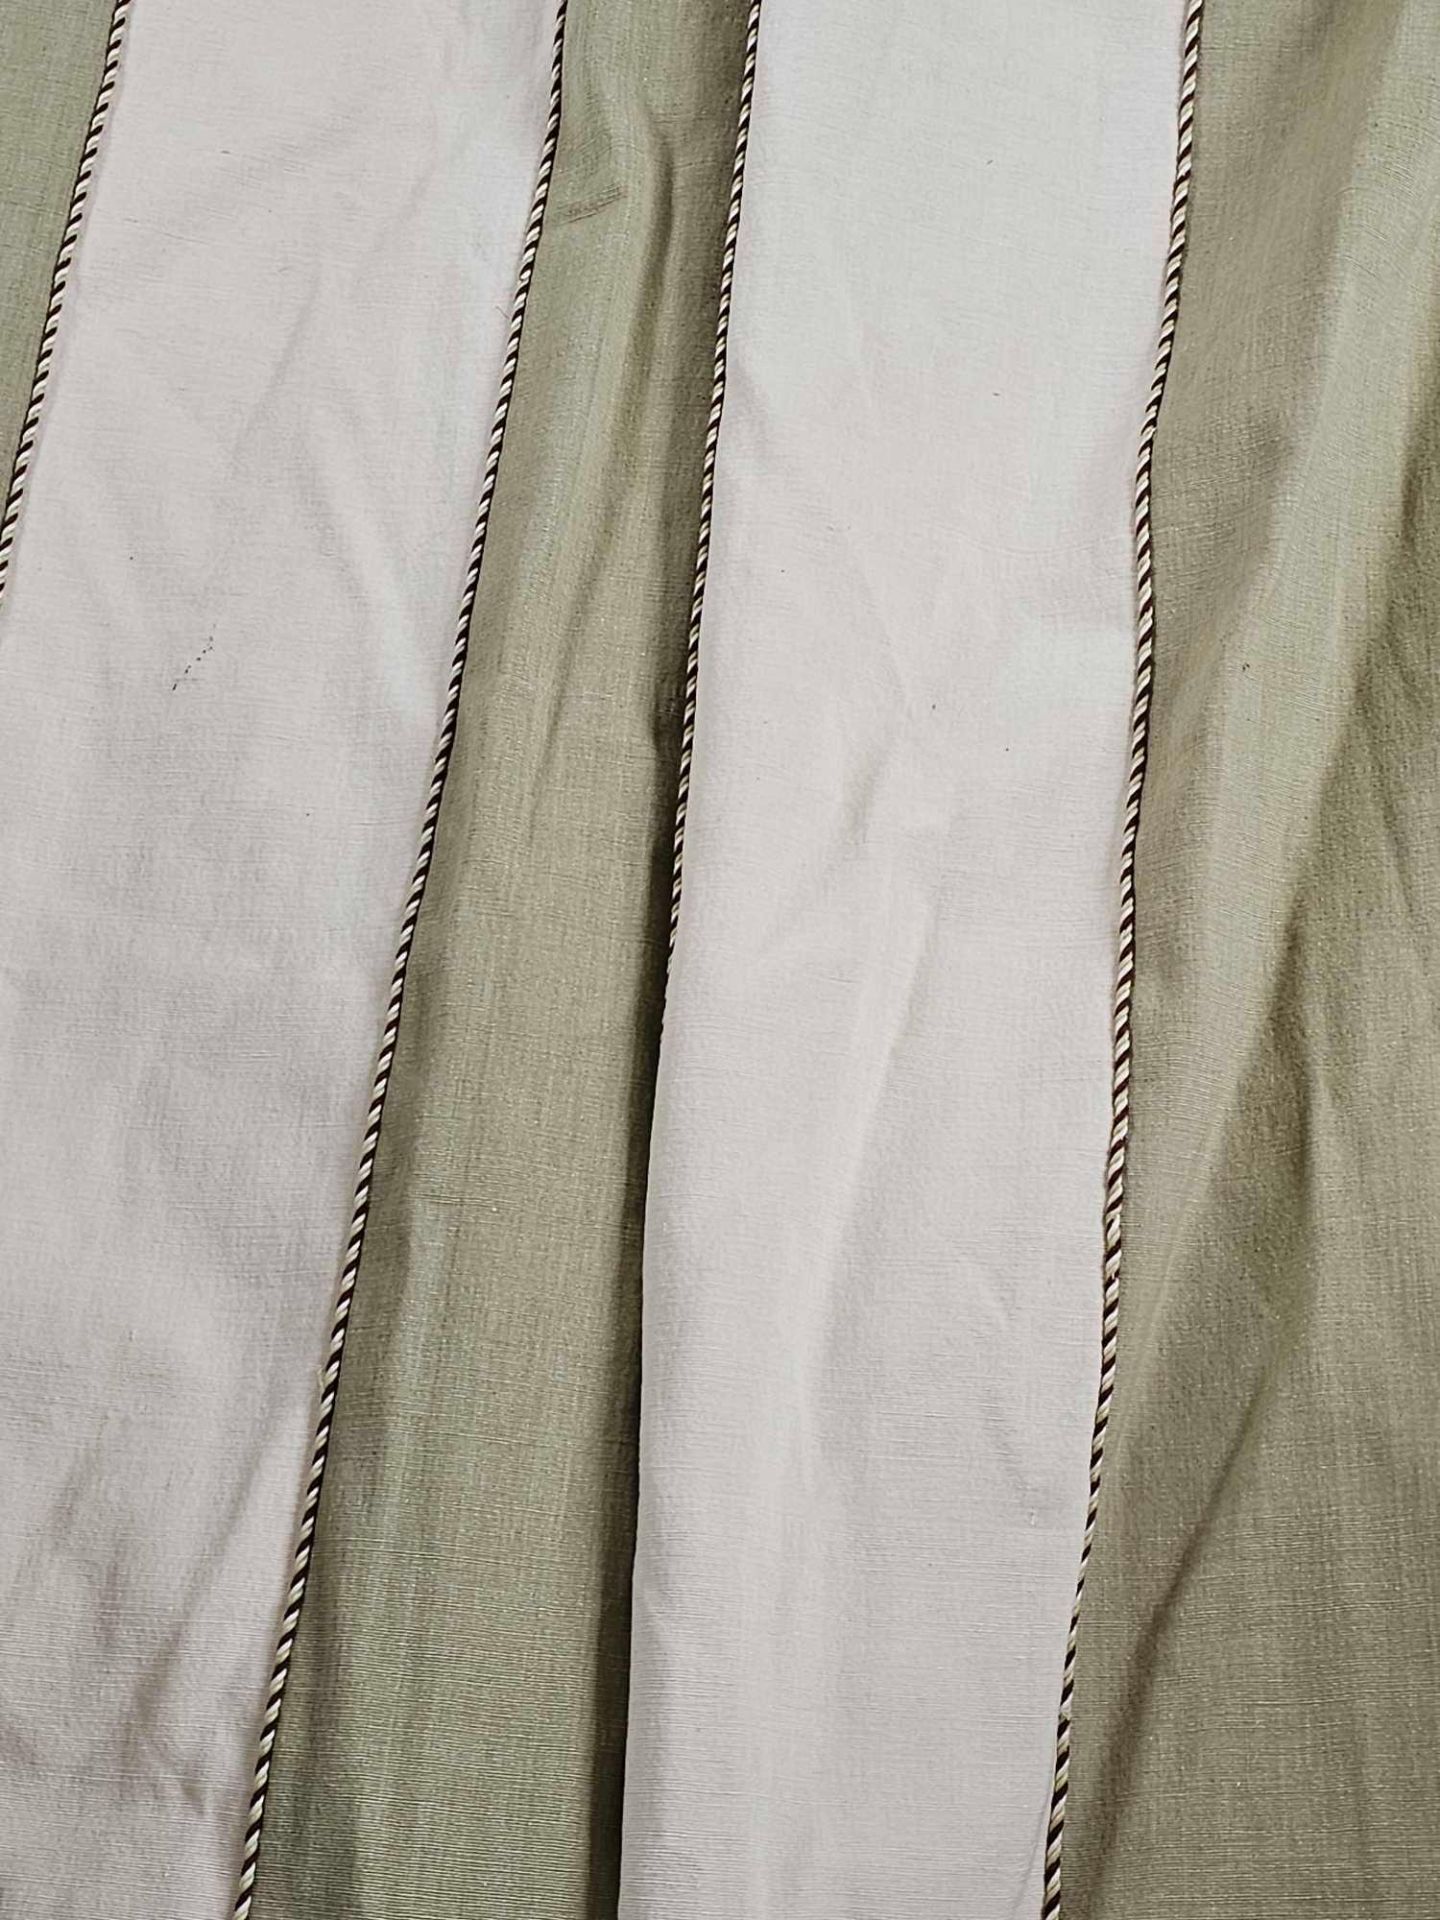 2 X Pairs Of Green And Cream Lined Drapes Each Panel 140 X 210cm Drop - Image 2 of 3